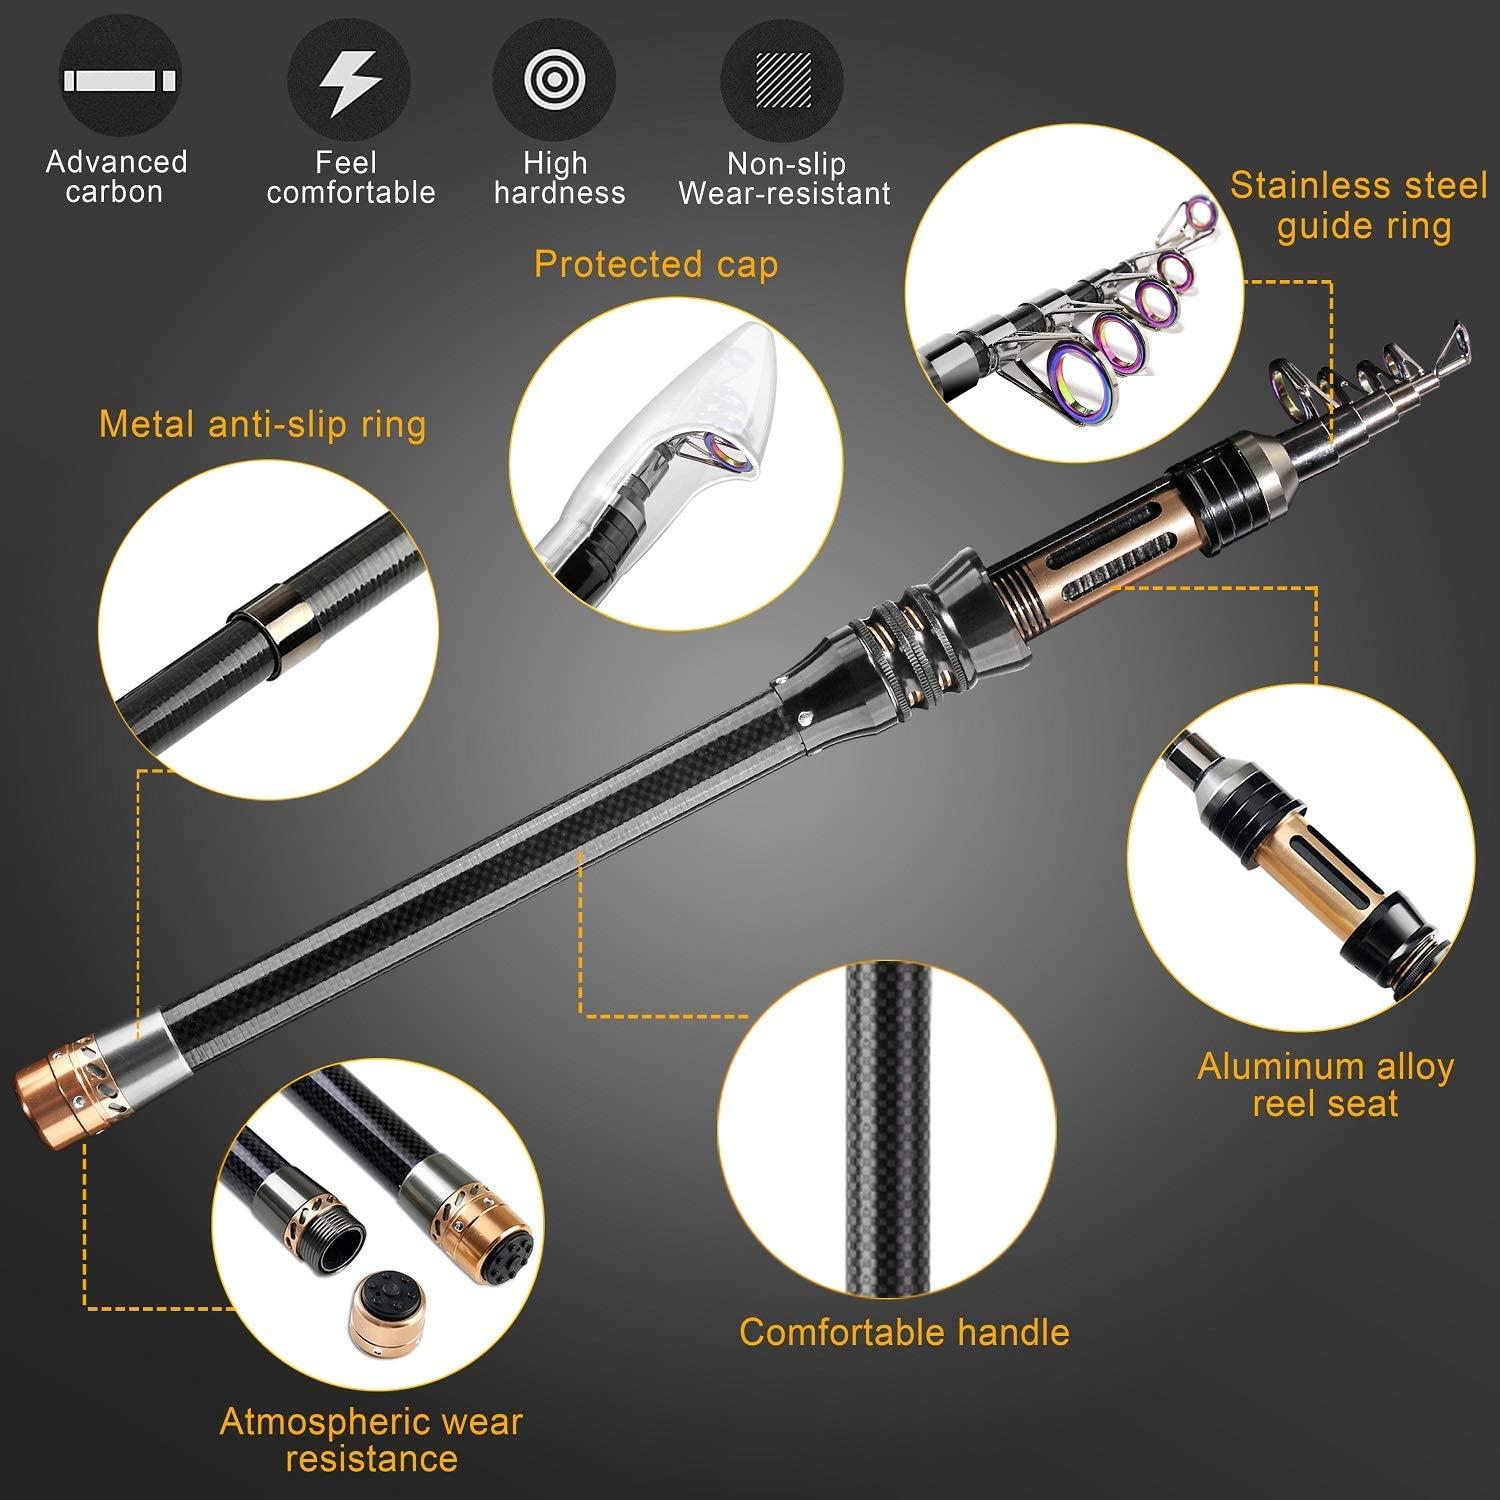 Telescopic Fishing Rod Kit, Carbon Fiber Fishing Pole and Reel Combos with  Spinn